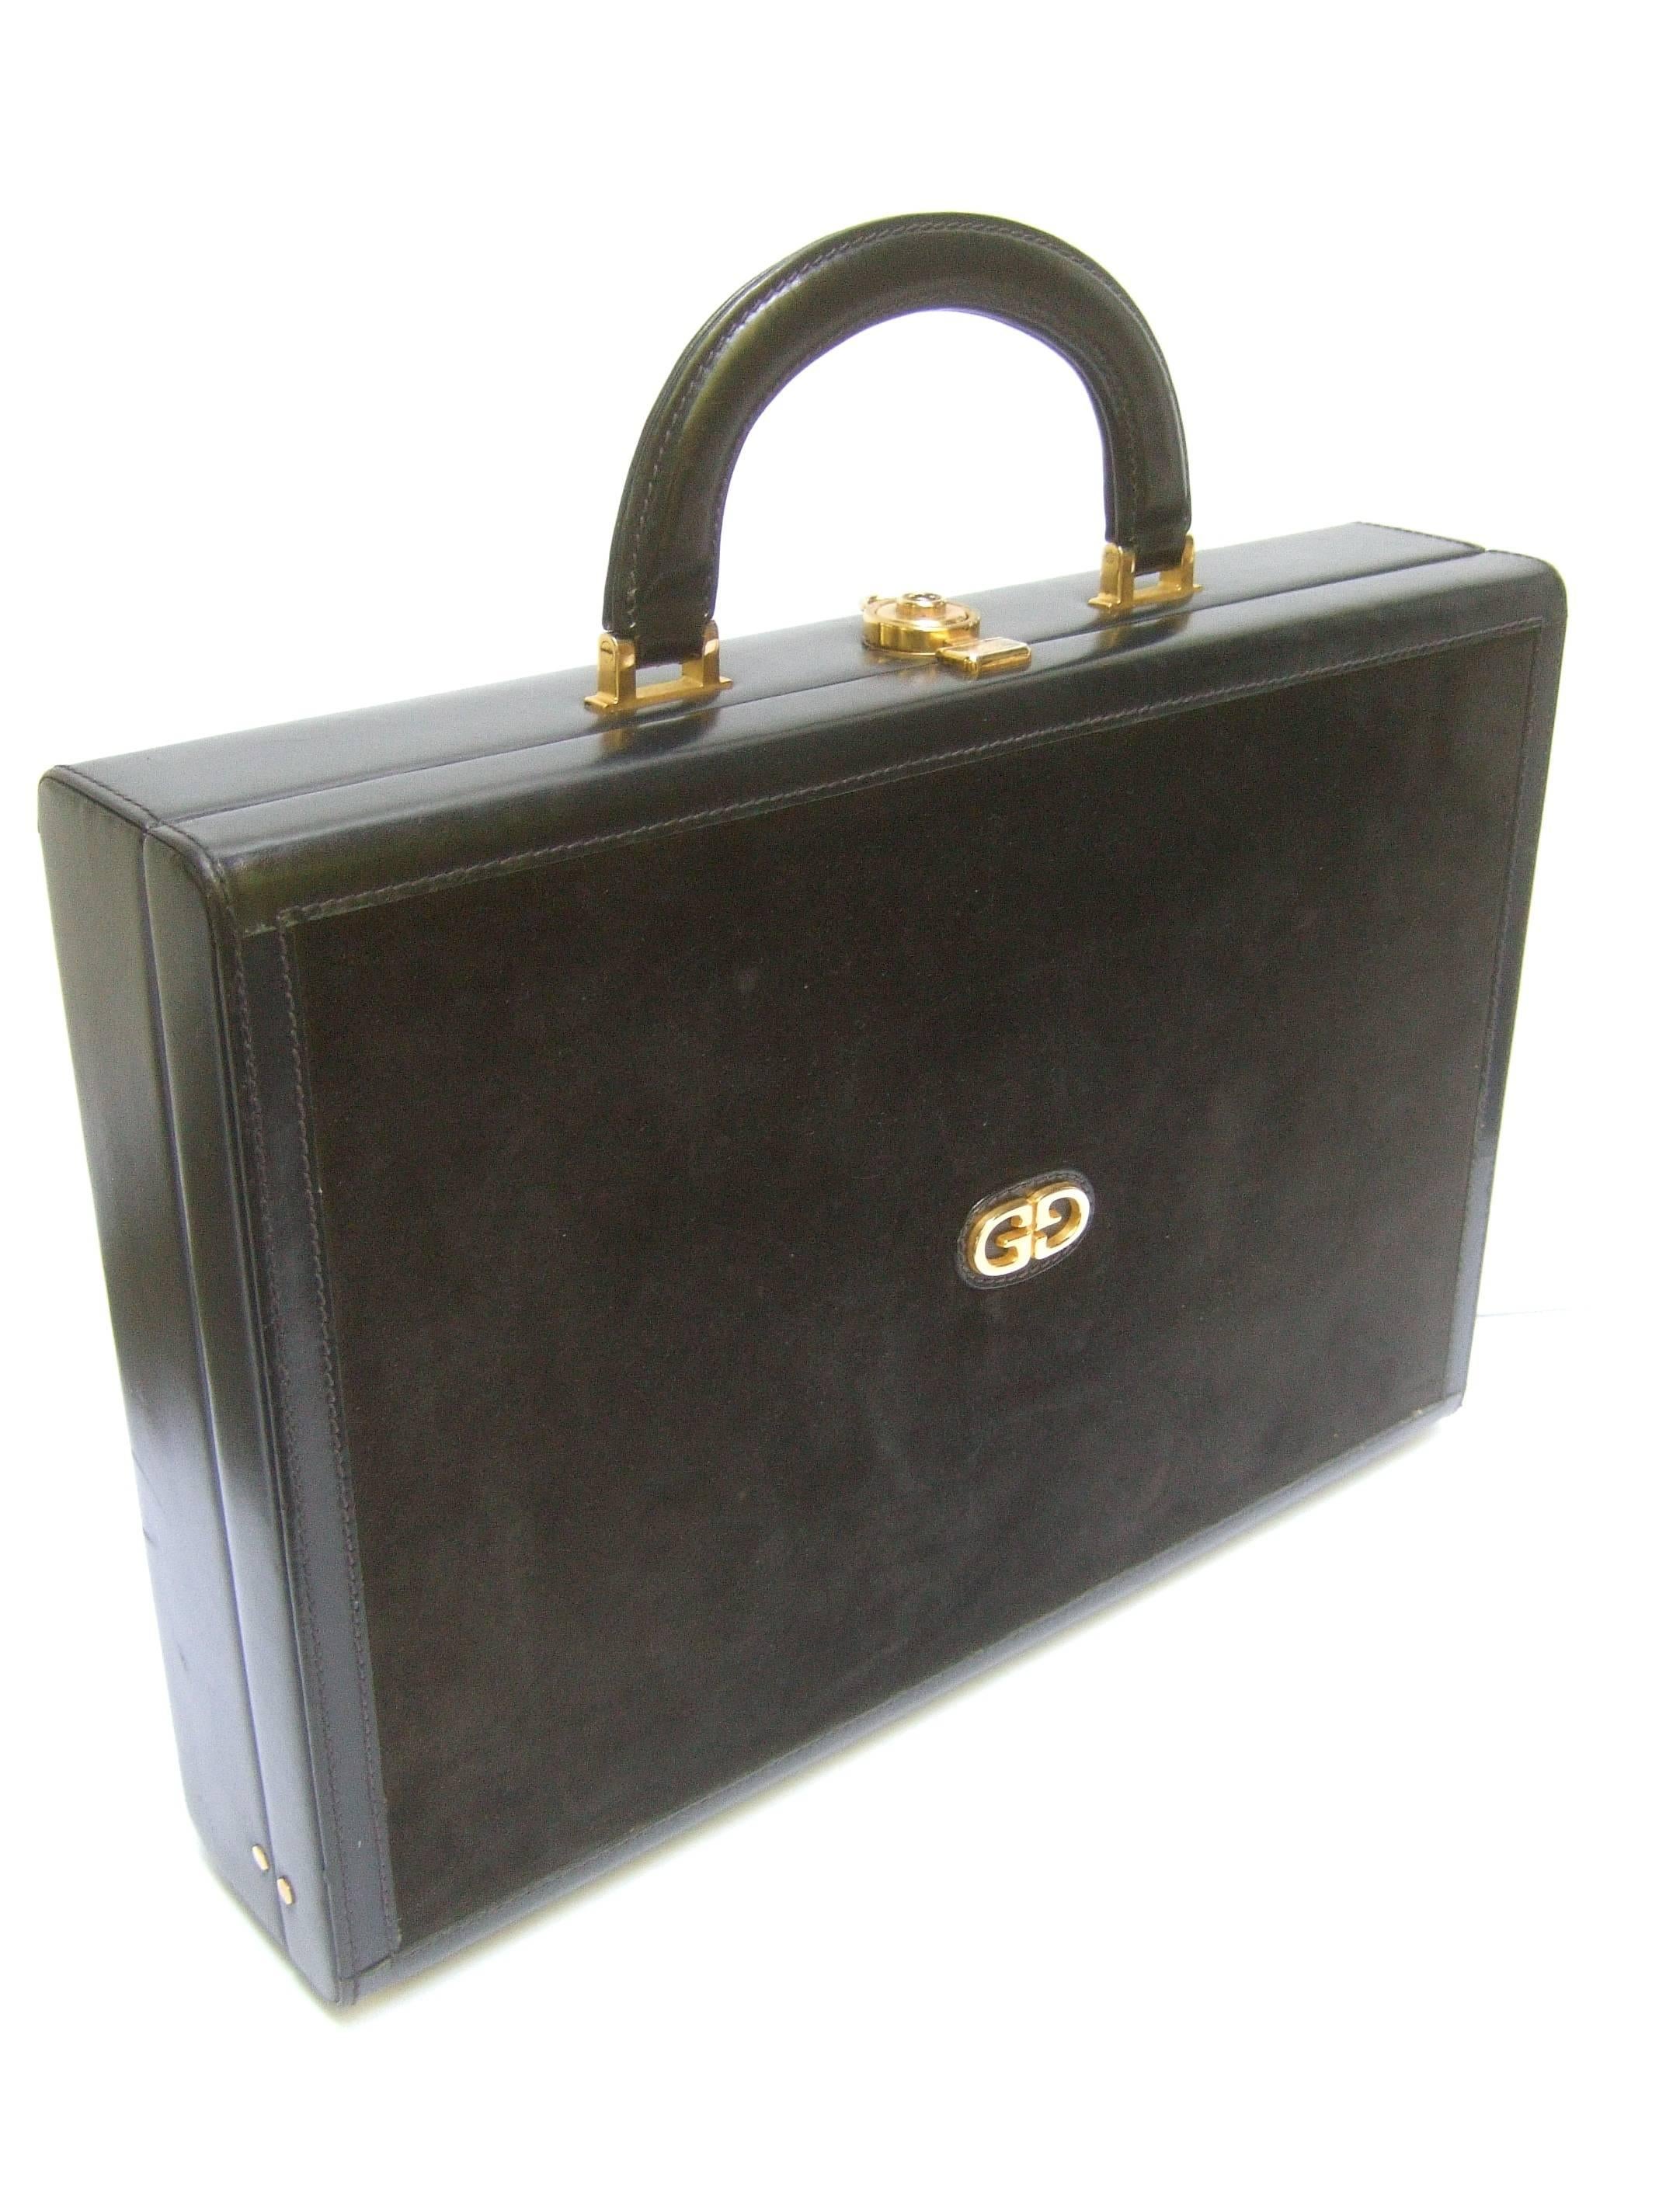 Gucci Luxurious Black Suede & Leather Briefcase circa 1970s 10